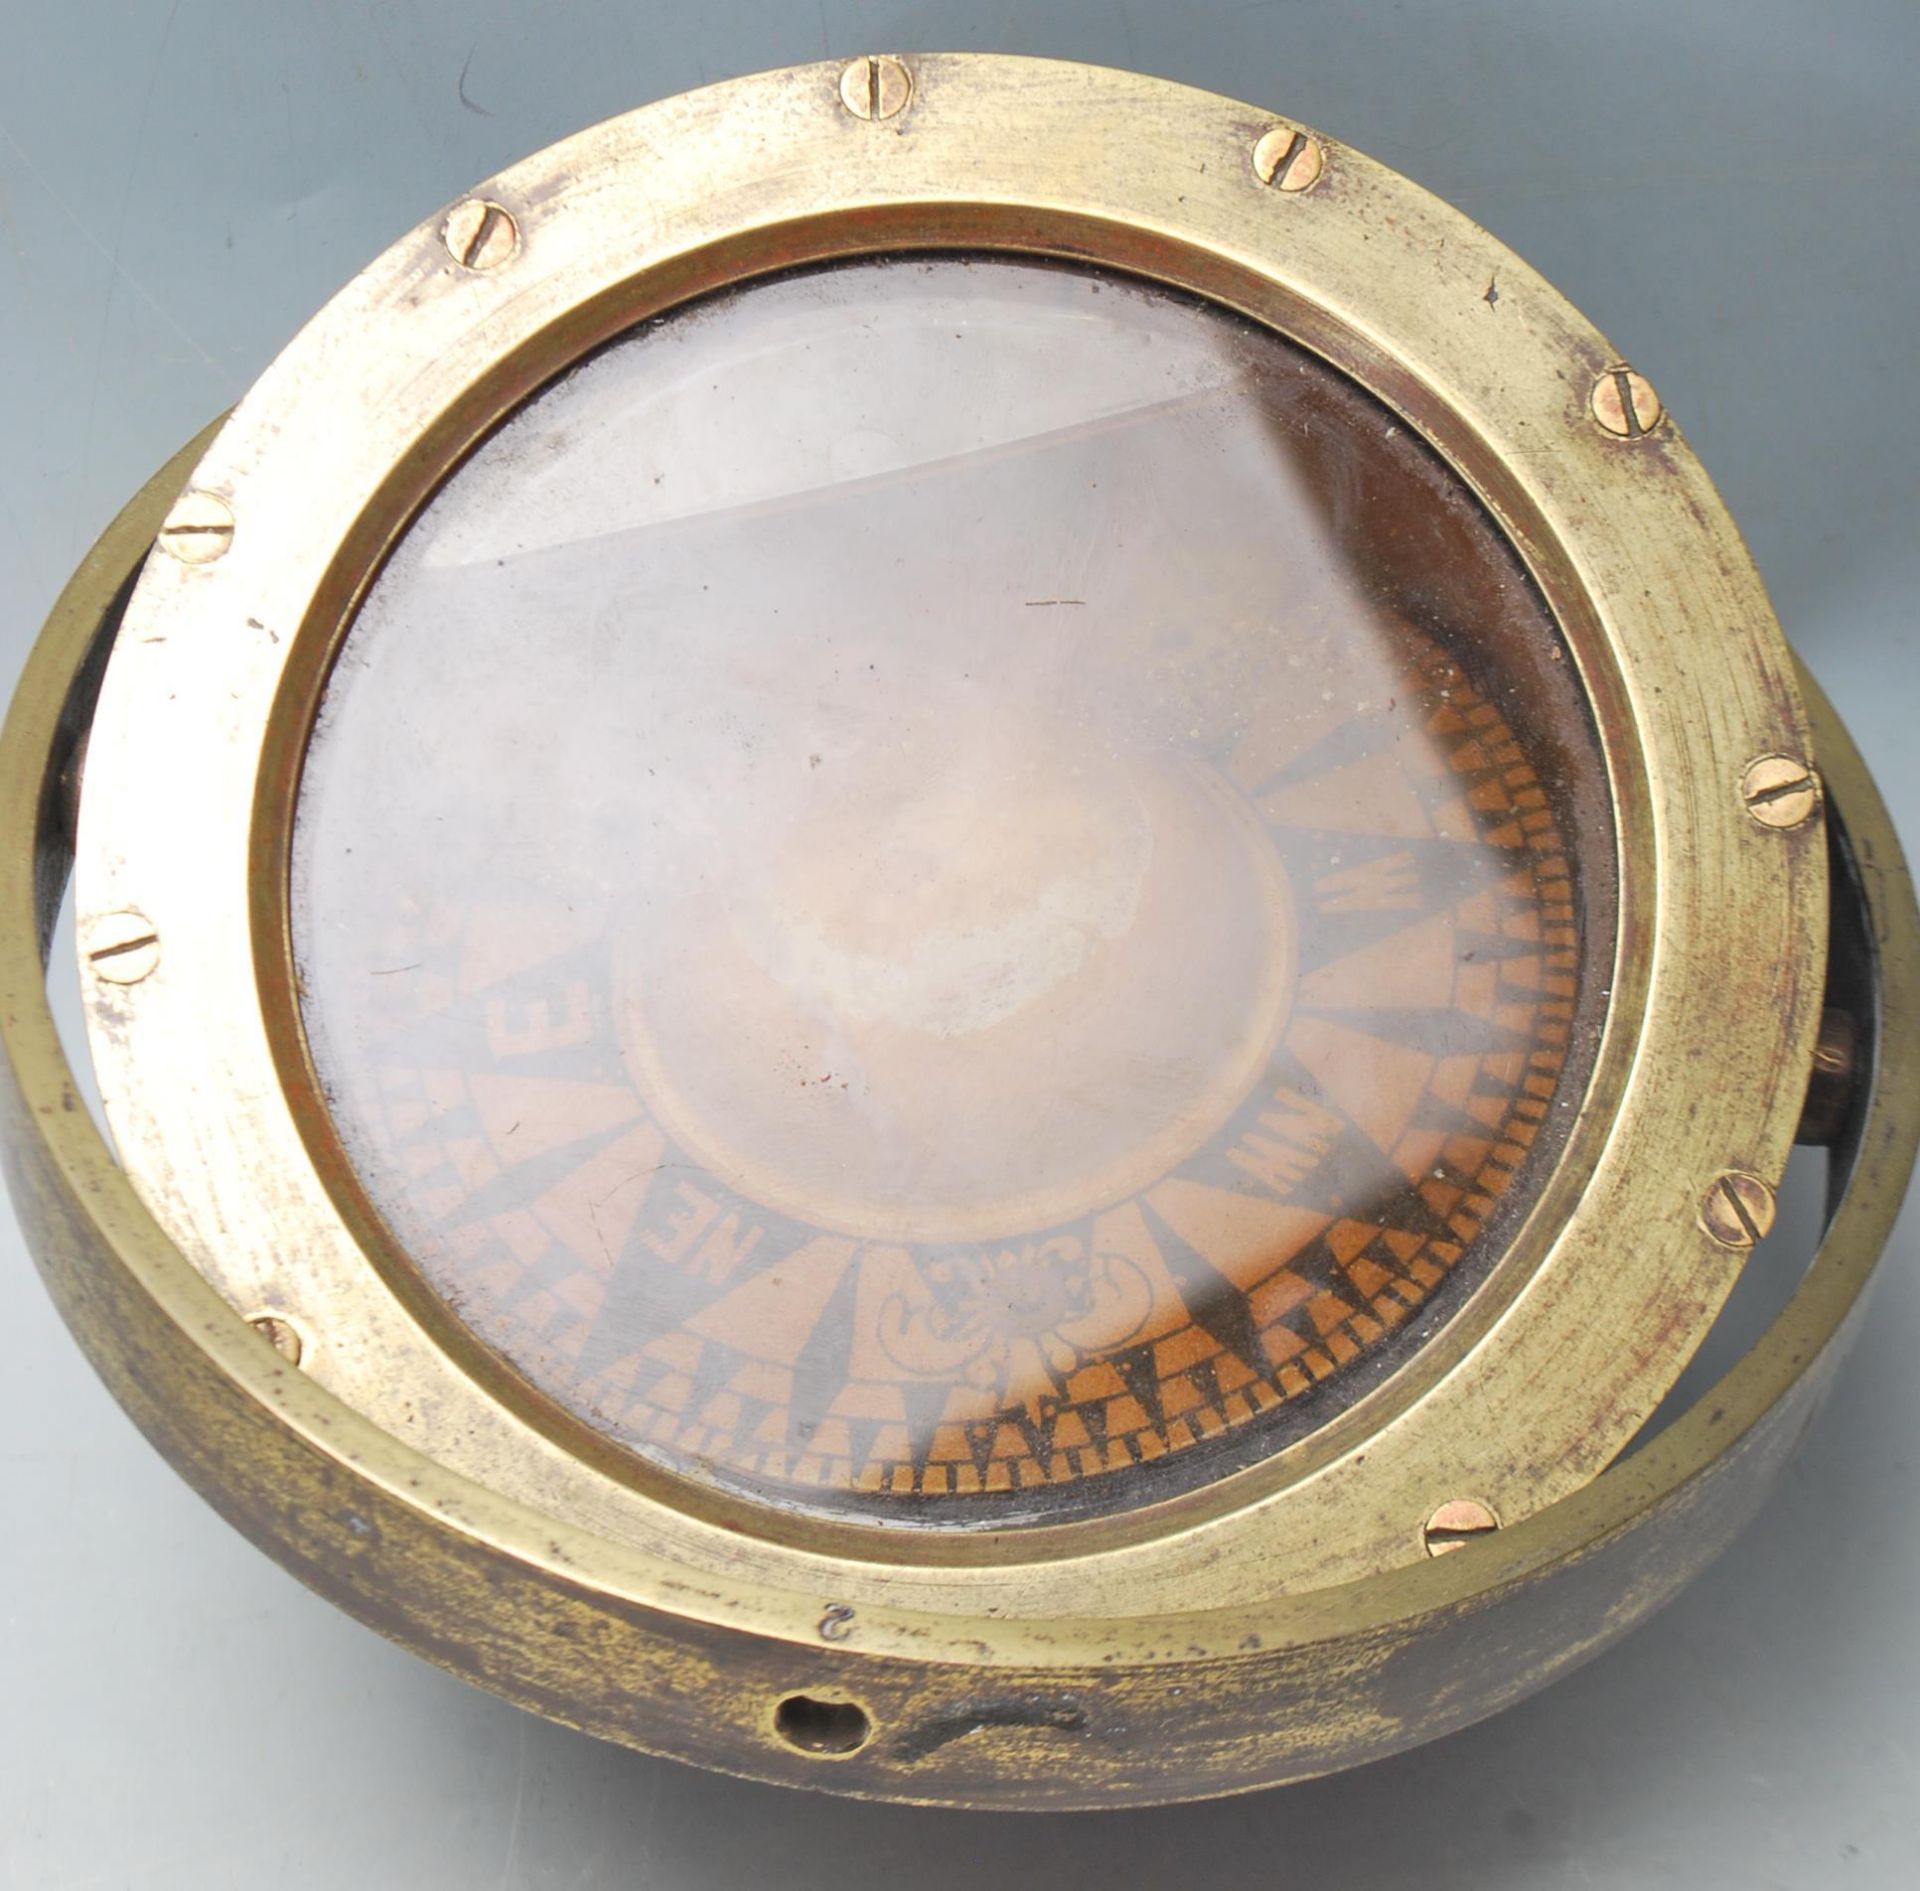 ANTIQUE EARLY 20TH CENTURY BRASS FRAMED GIMBAL MOUNTED SHIPS COMPASS - Image 3 of 5